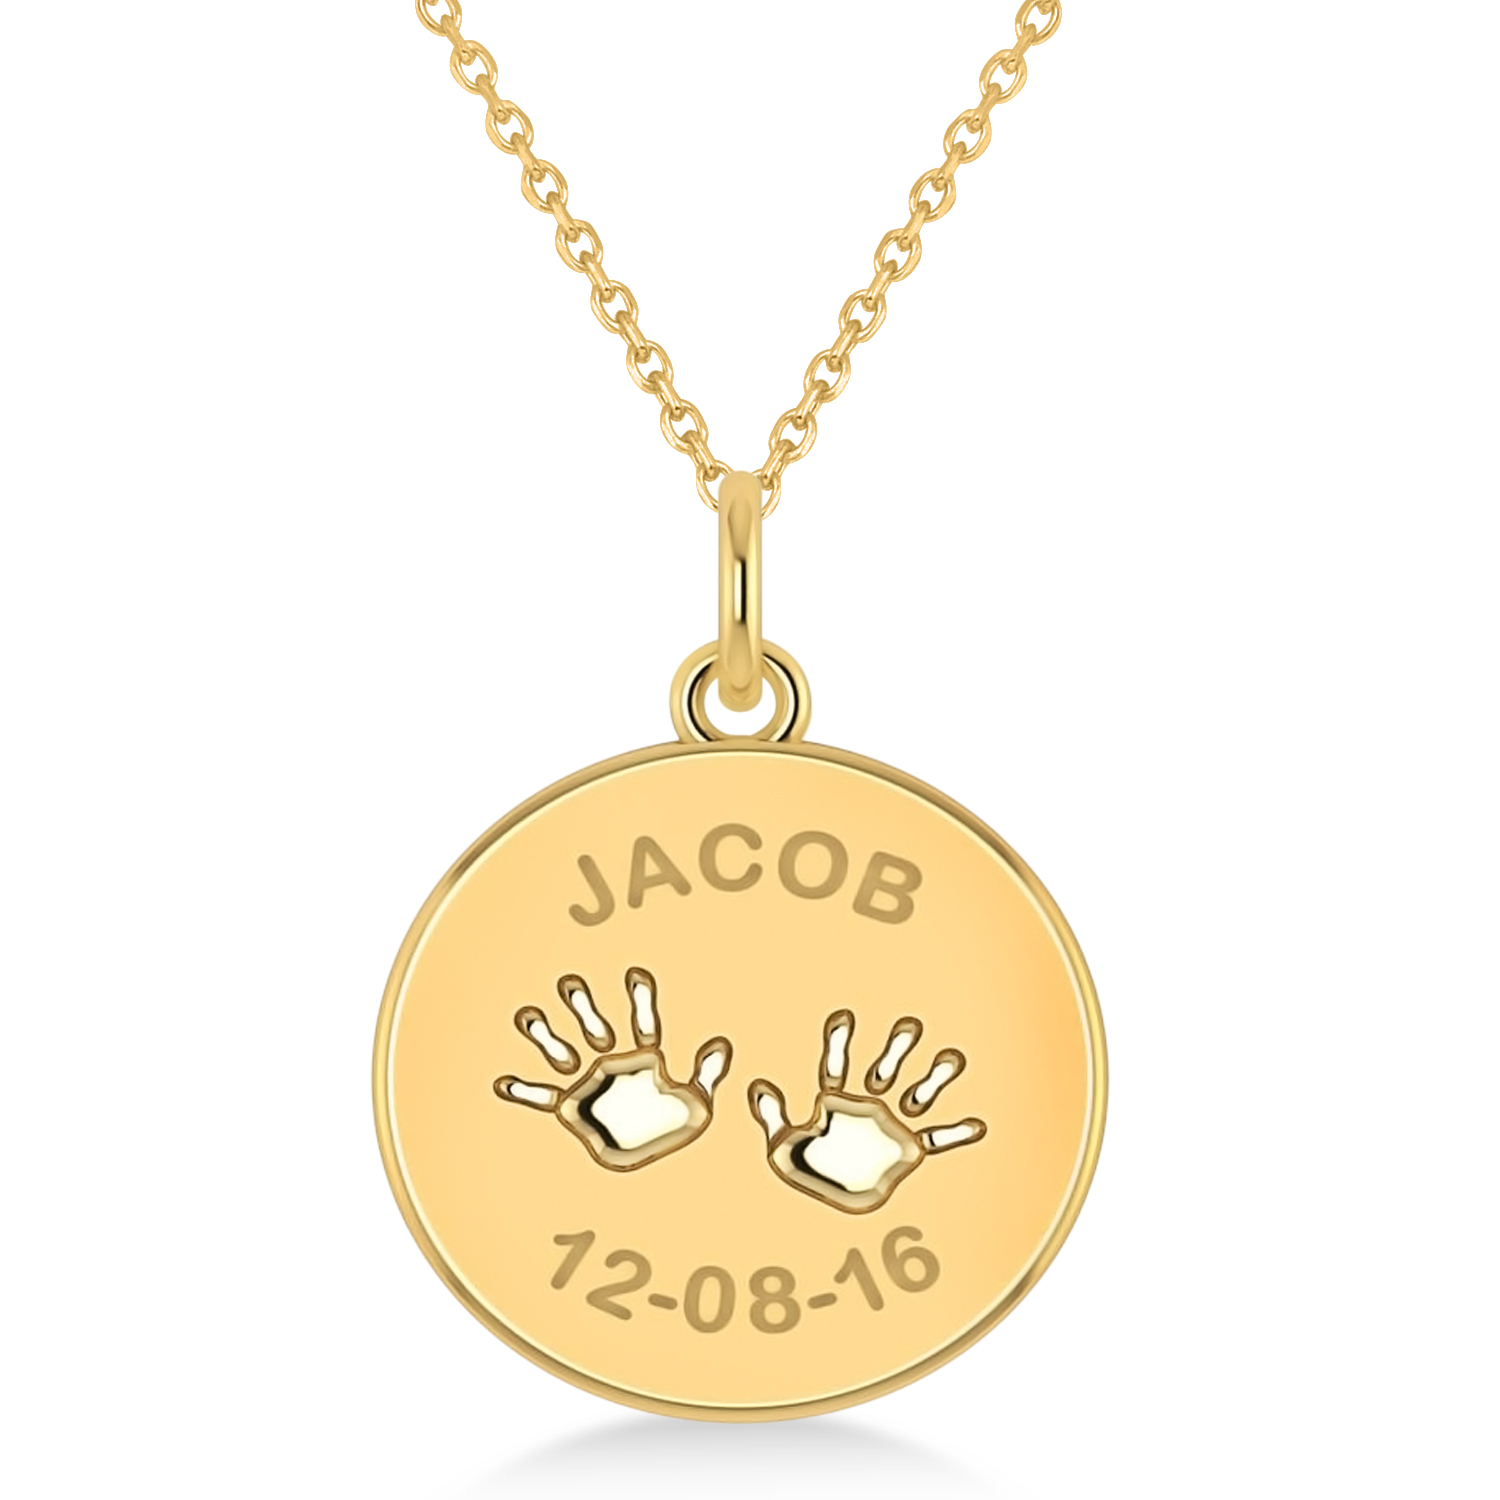 Personalized Baby Name Charm Pendant Necklace 14k Yellow Gold from Allurez.